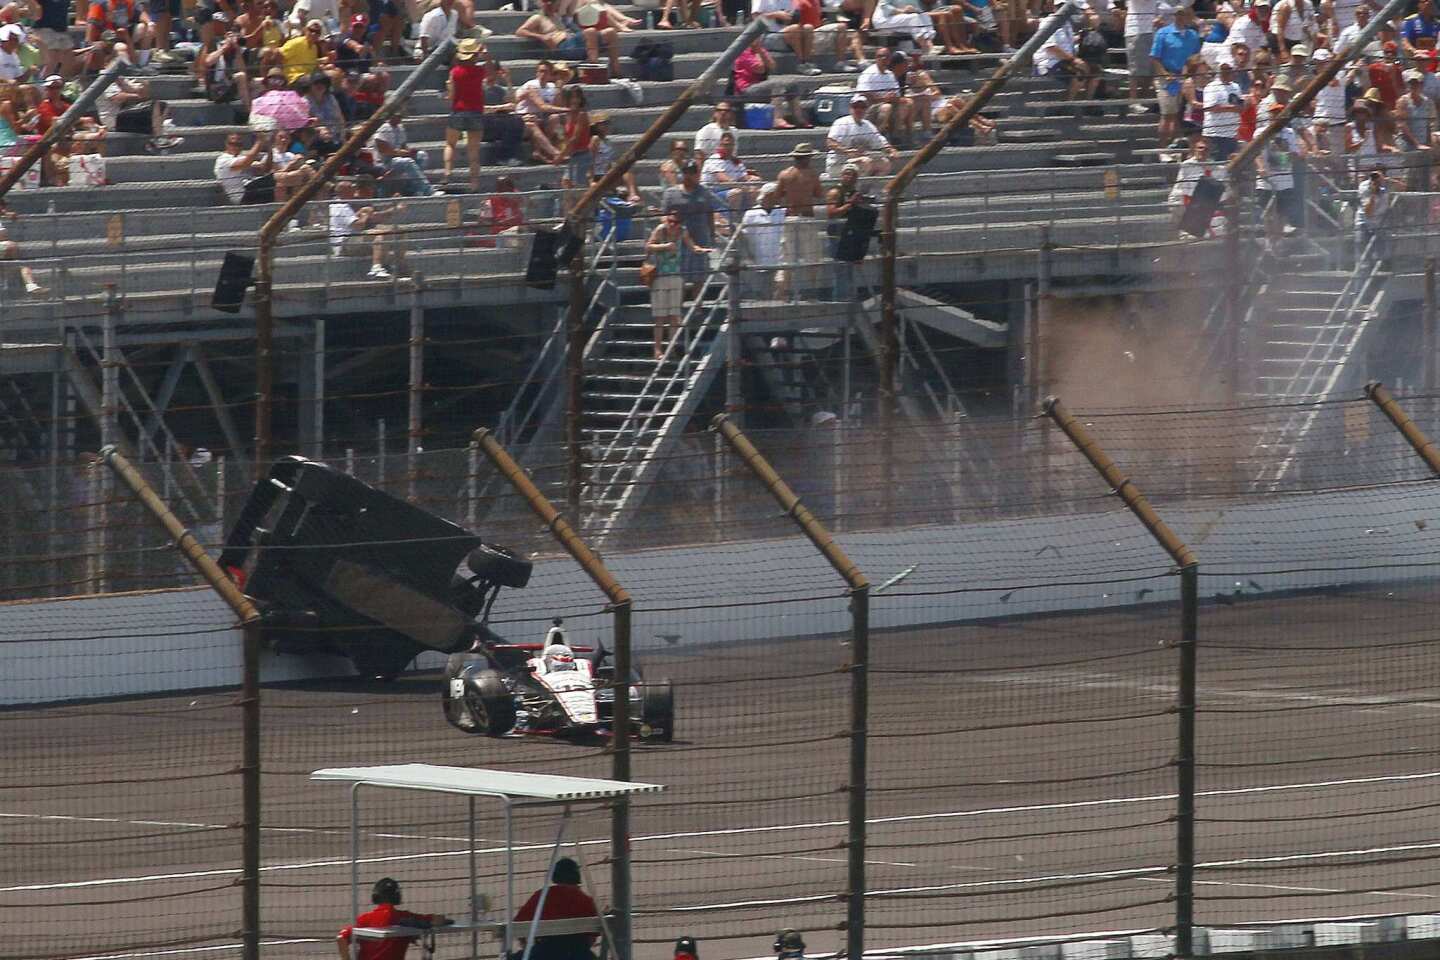 The car of driver Mike Conway slides along the retaining wall and fence after going airborne following a collision with the car of Will Power on Sunday at the Indy 500.